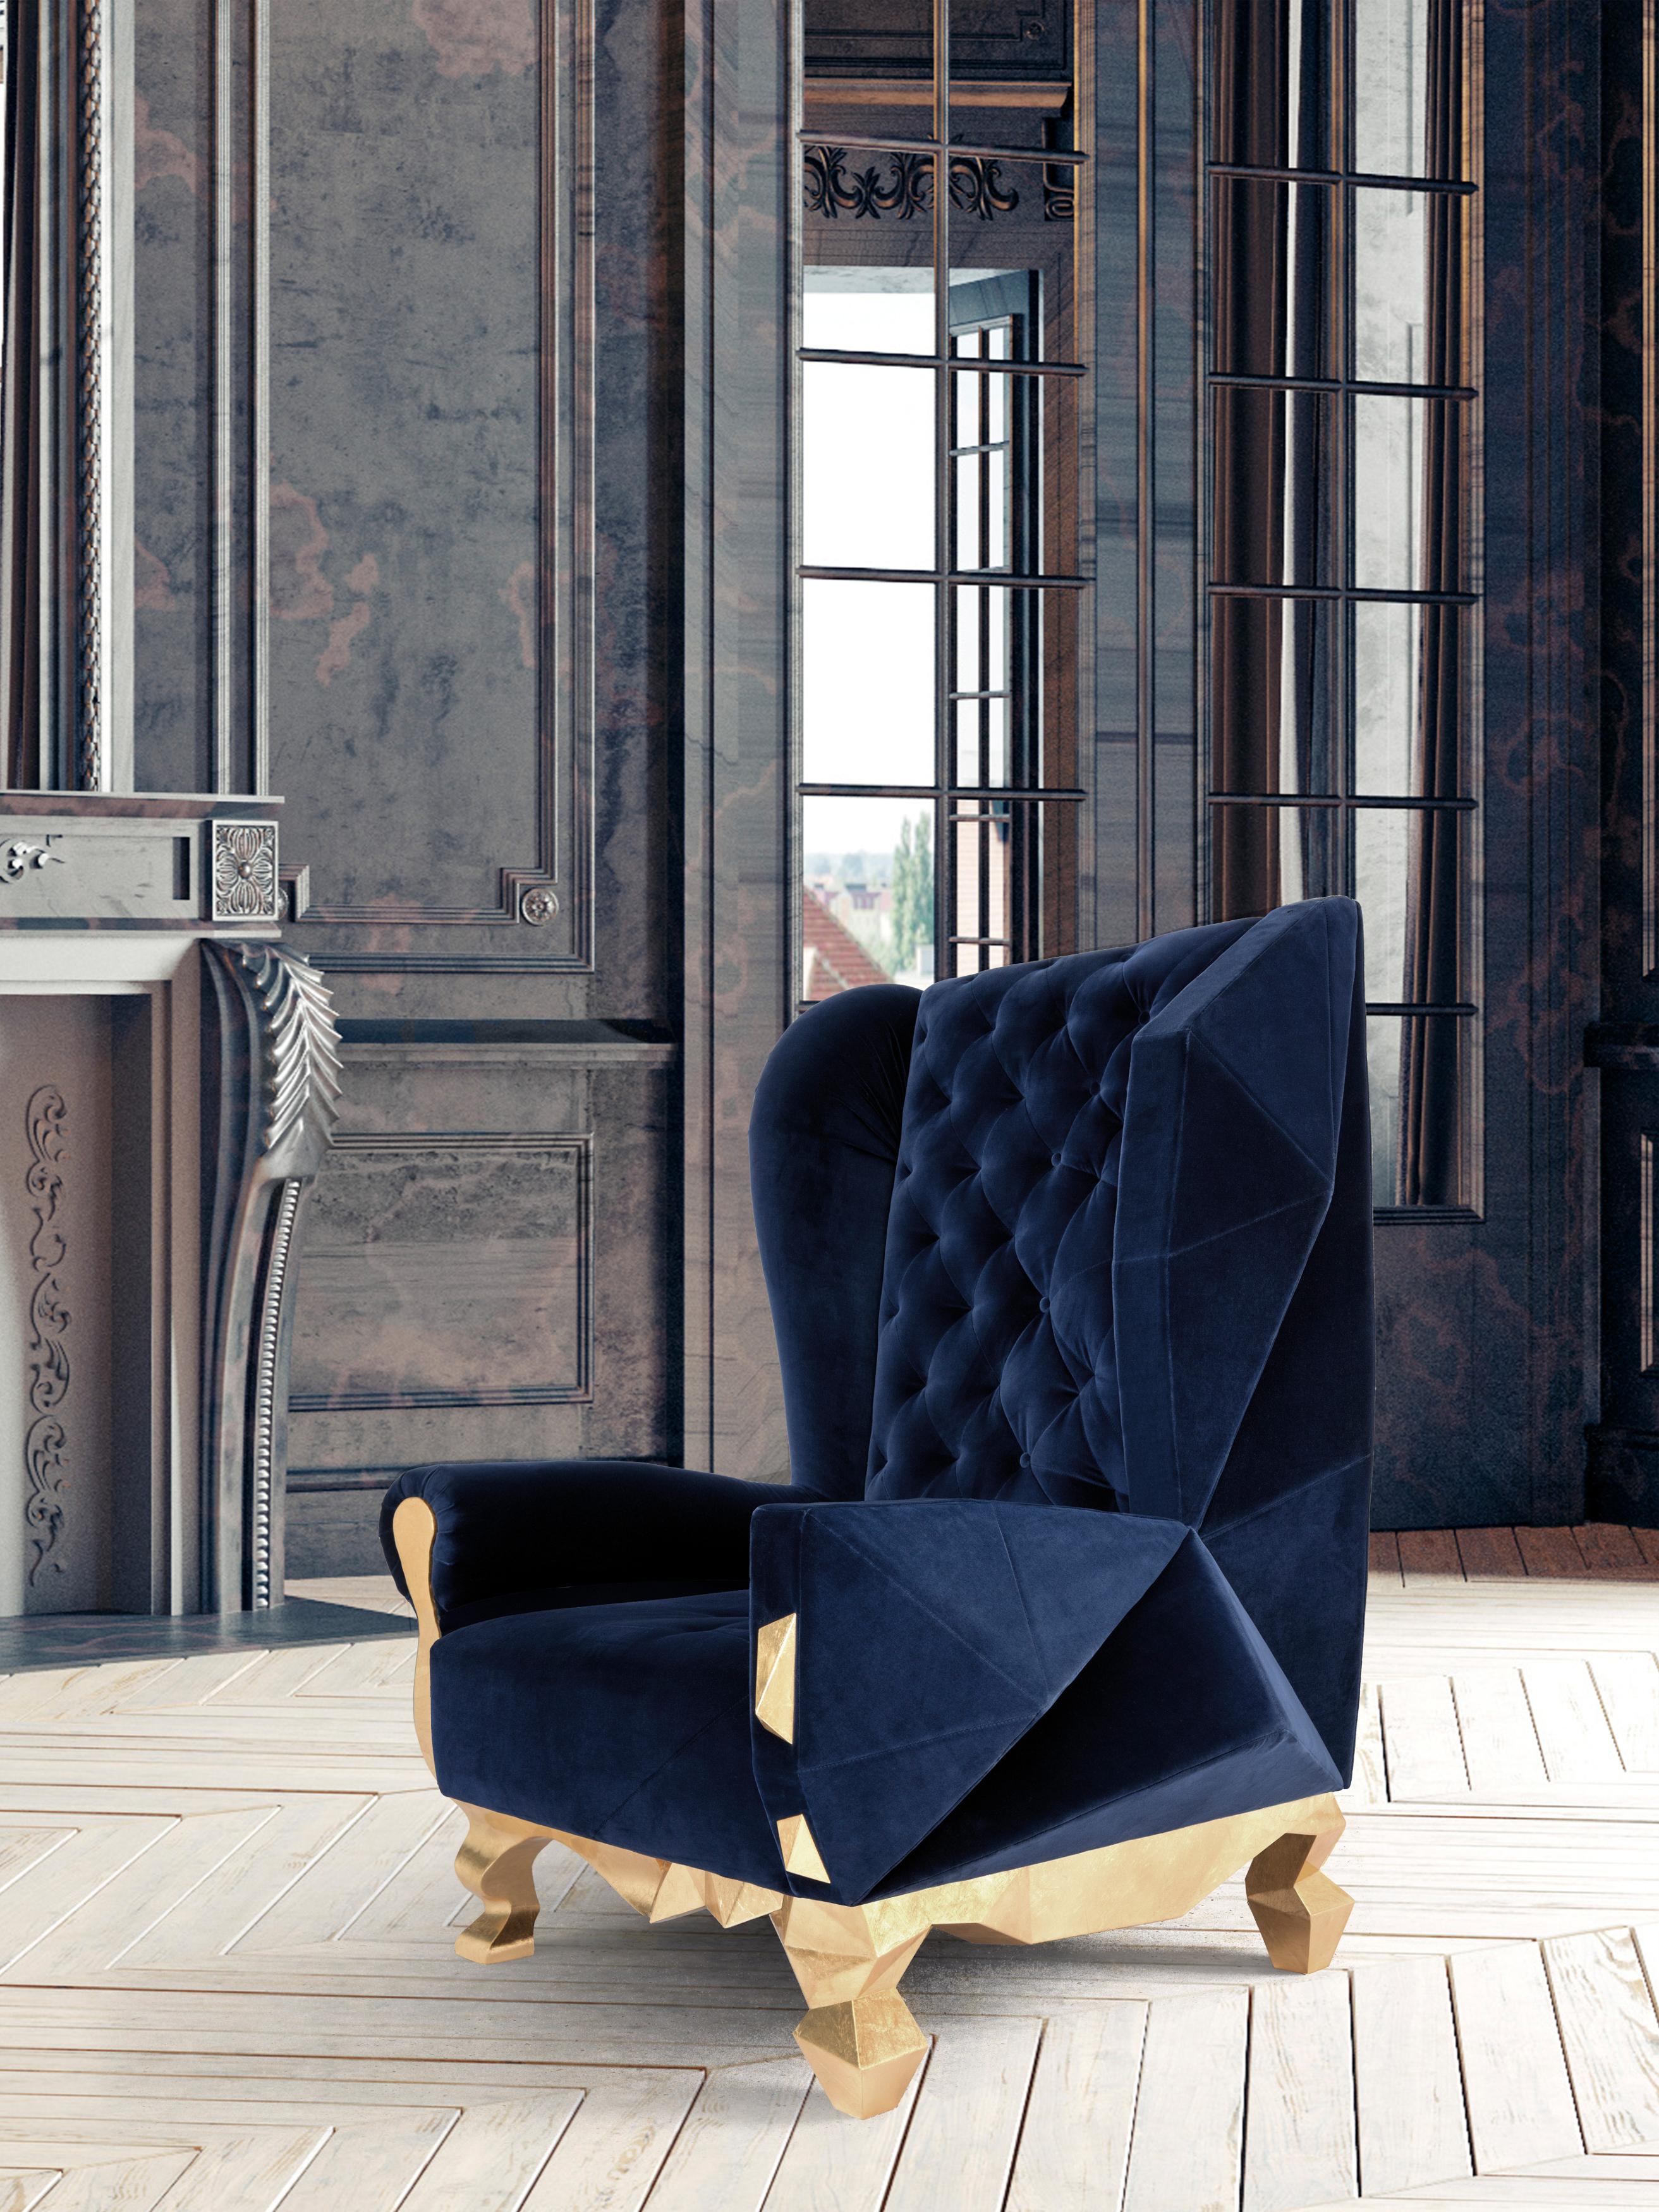 Velvet Blue Rockchair by Royal Stranger
Dimensions: Width 98cm, height 135cm, depth 99cm
Different upholstery colors and finishes are available. Brass, copper or stainless steel in polished or brushed finish.
Materials: velvet on the top of the gold